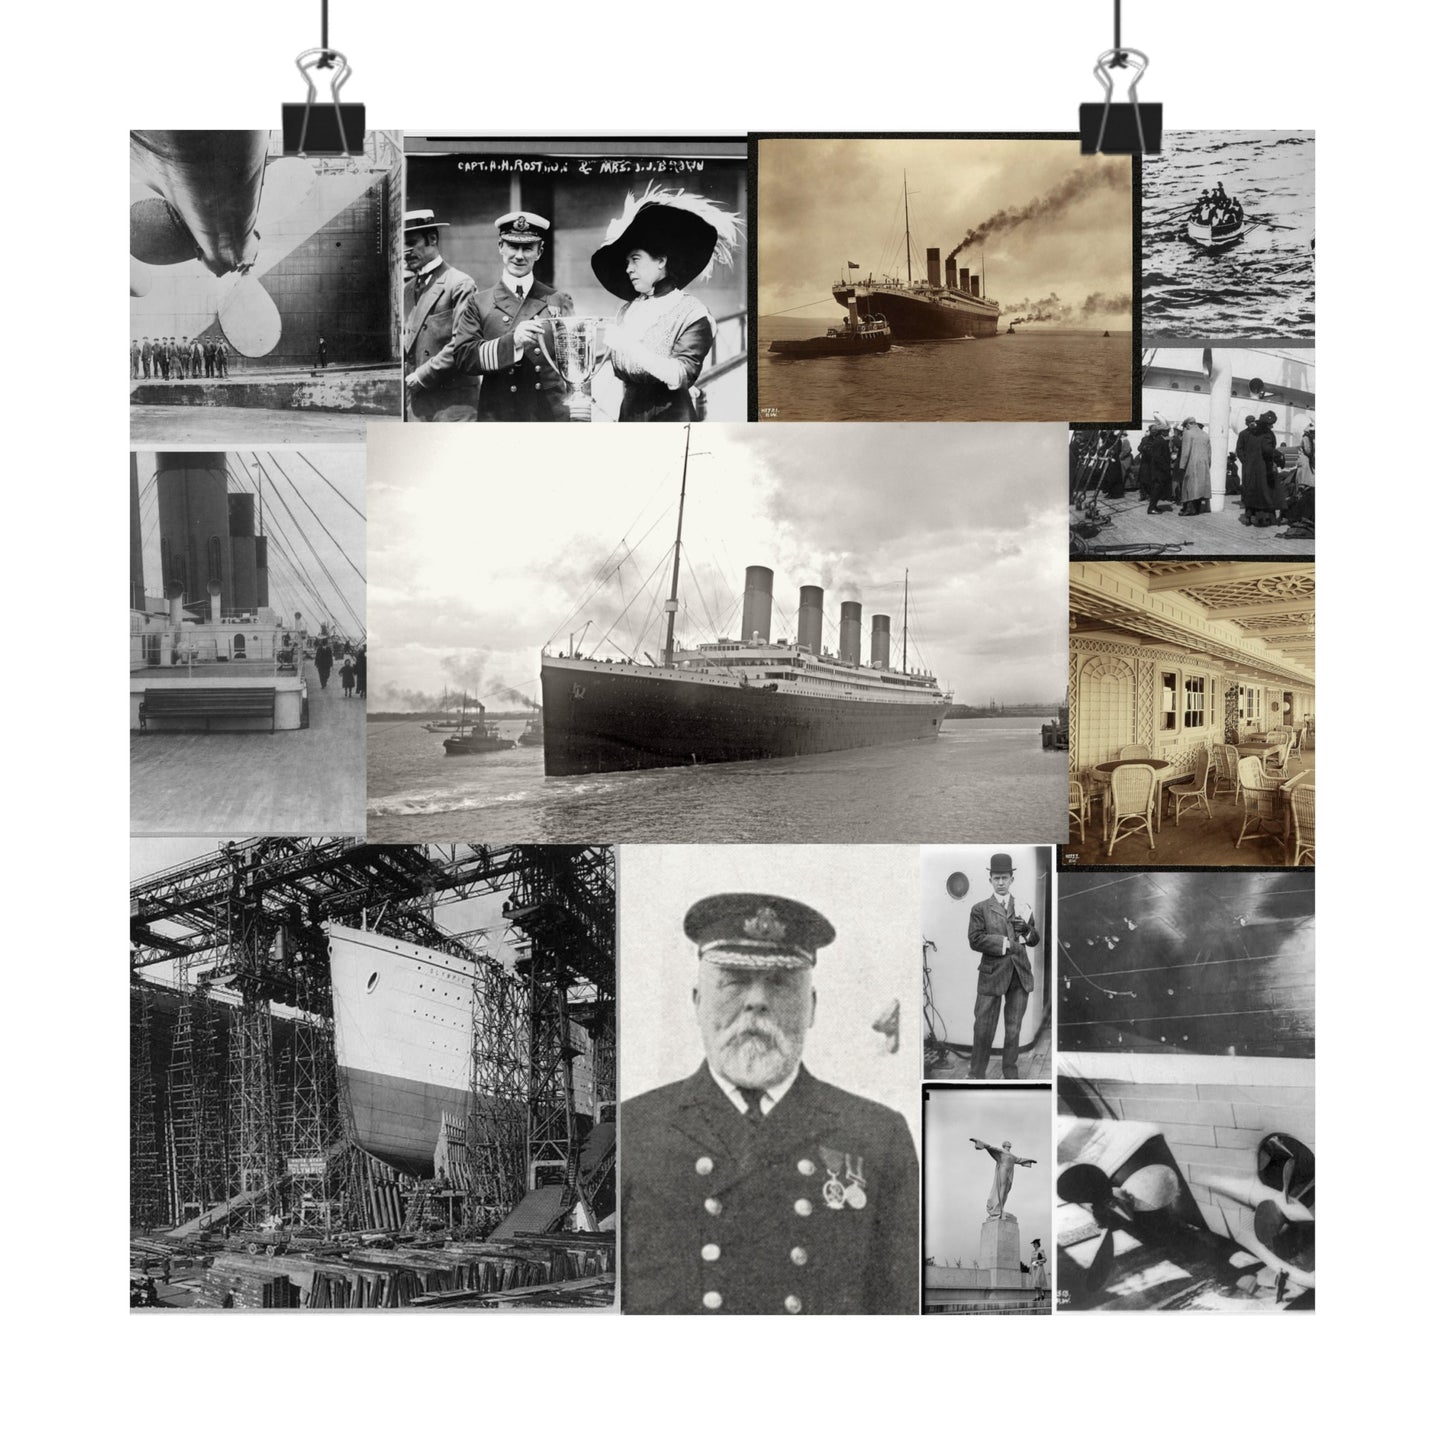 Titanic Posters, Matte Horizontal, Historical Photos, 11x9, 13x10, and 10x10 inches available, Giclée Print, Archival paper